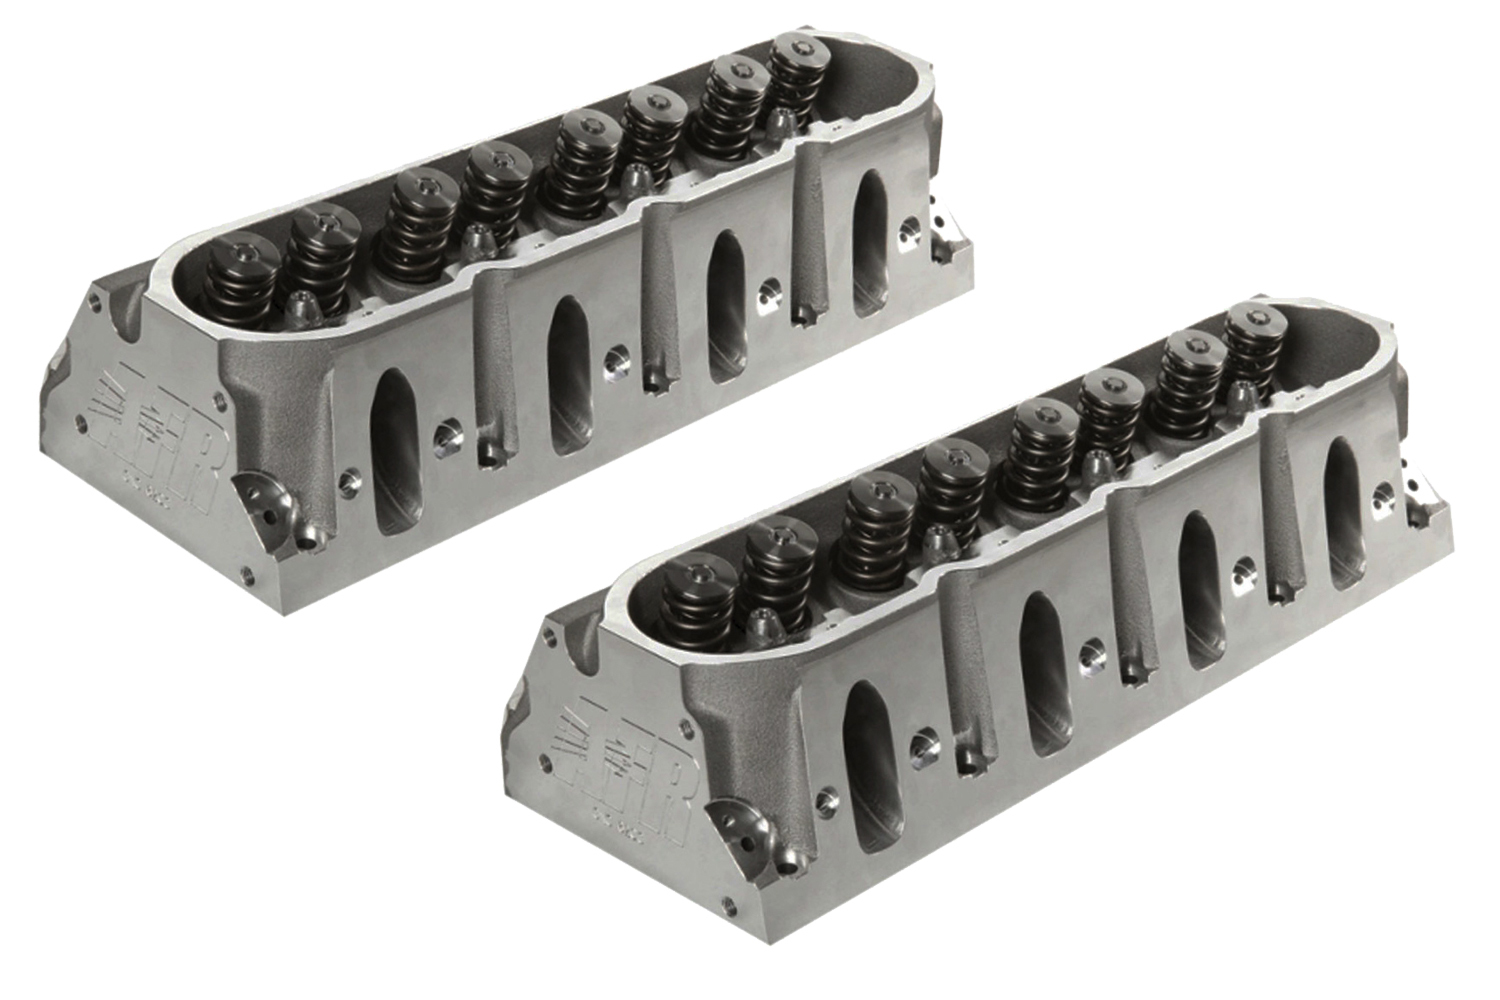 AIR FLOW RESEARCH Cylinder Head, LS1 Mongoose Strip, Assembled, 2.080/1.600in Va